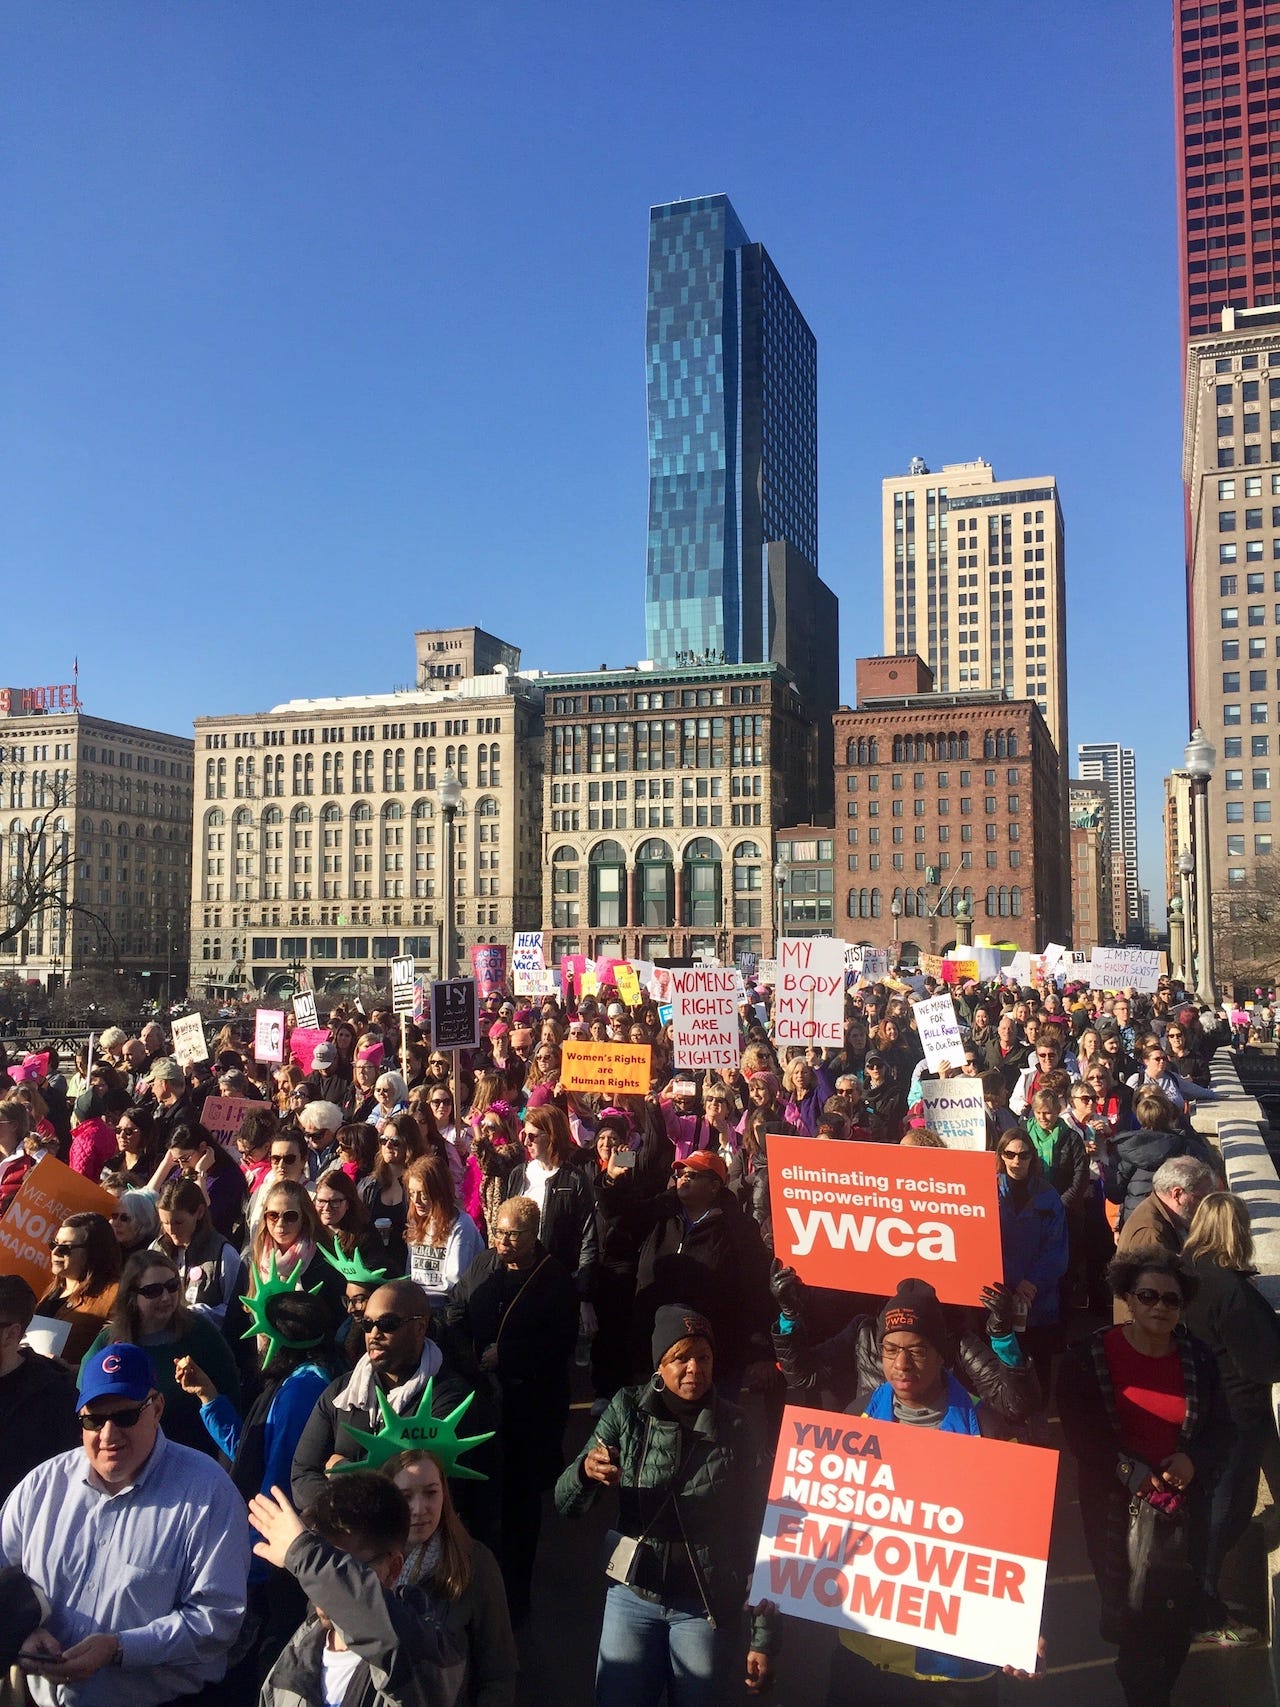 YWCA protesters march outside for a rally to eliminate racism and empower women.